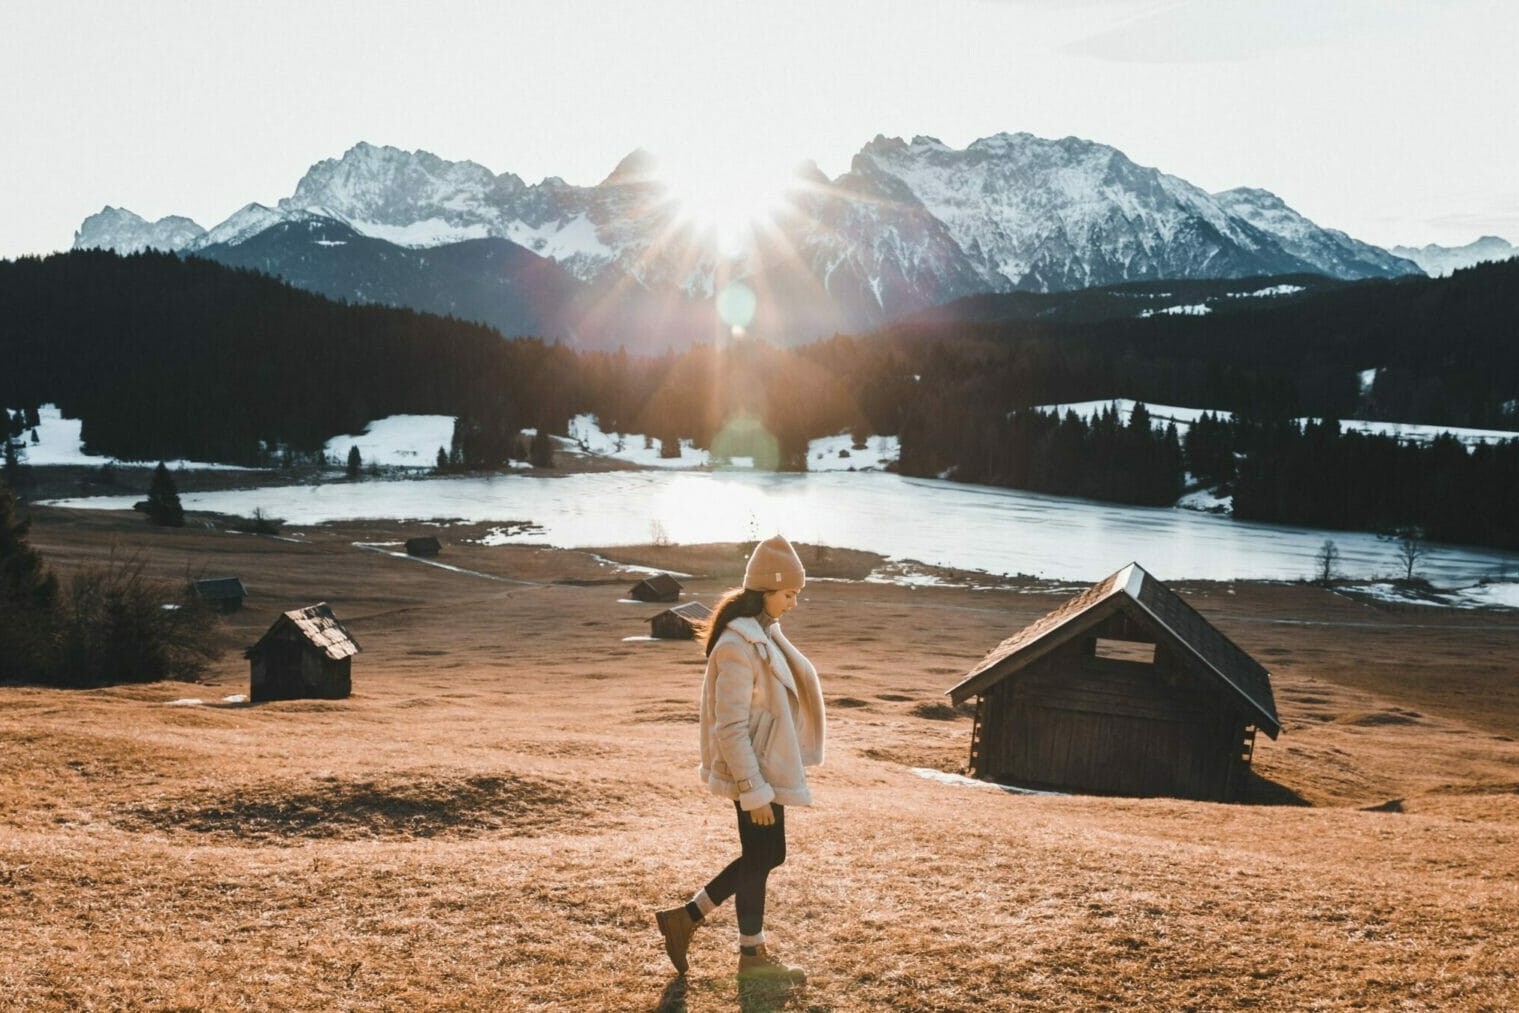 Glow by G Holiday Season header image, girl in winter clothes walking near a frozen lake with snow covered mountains in background